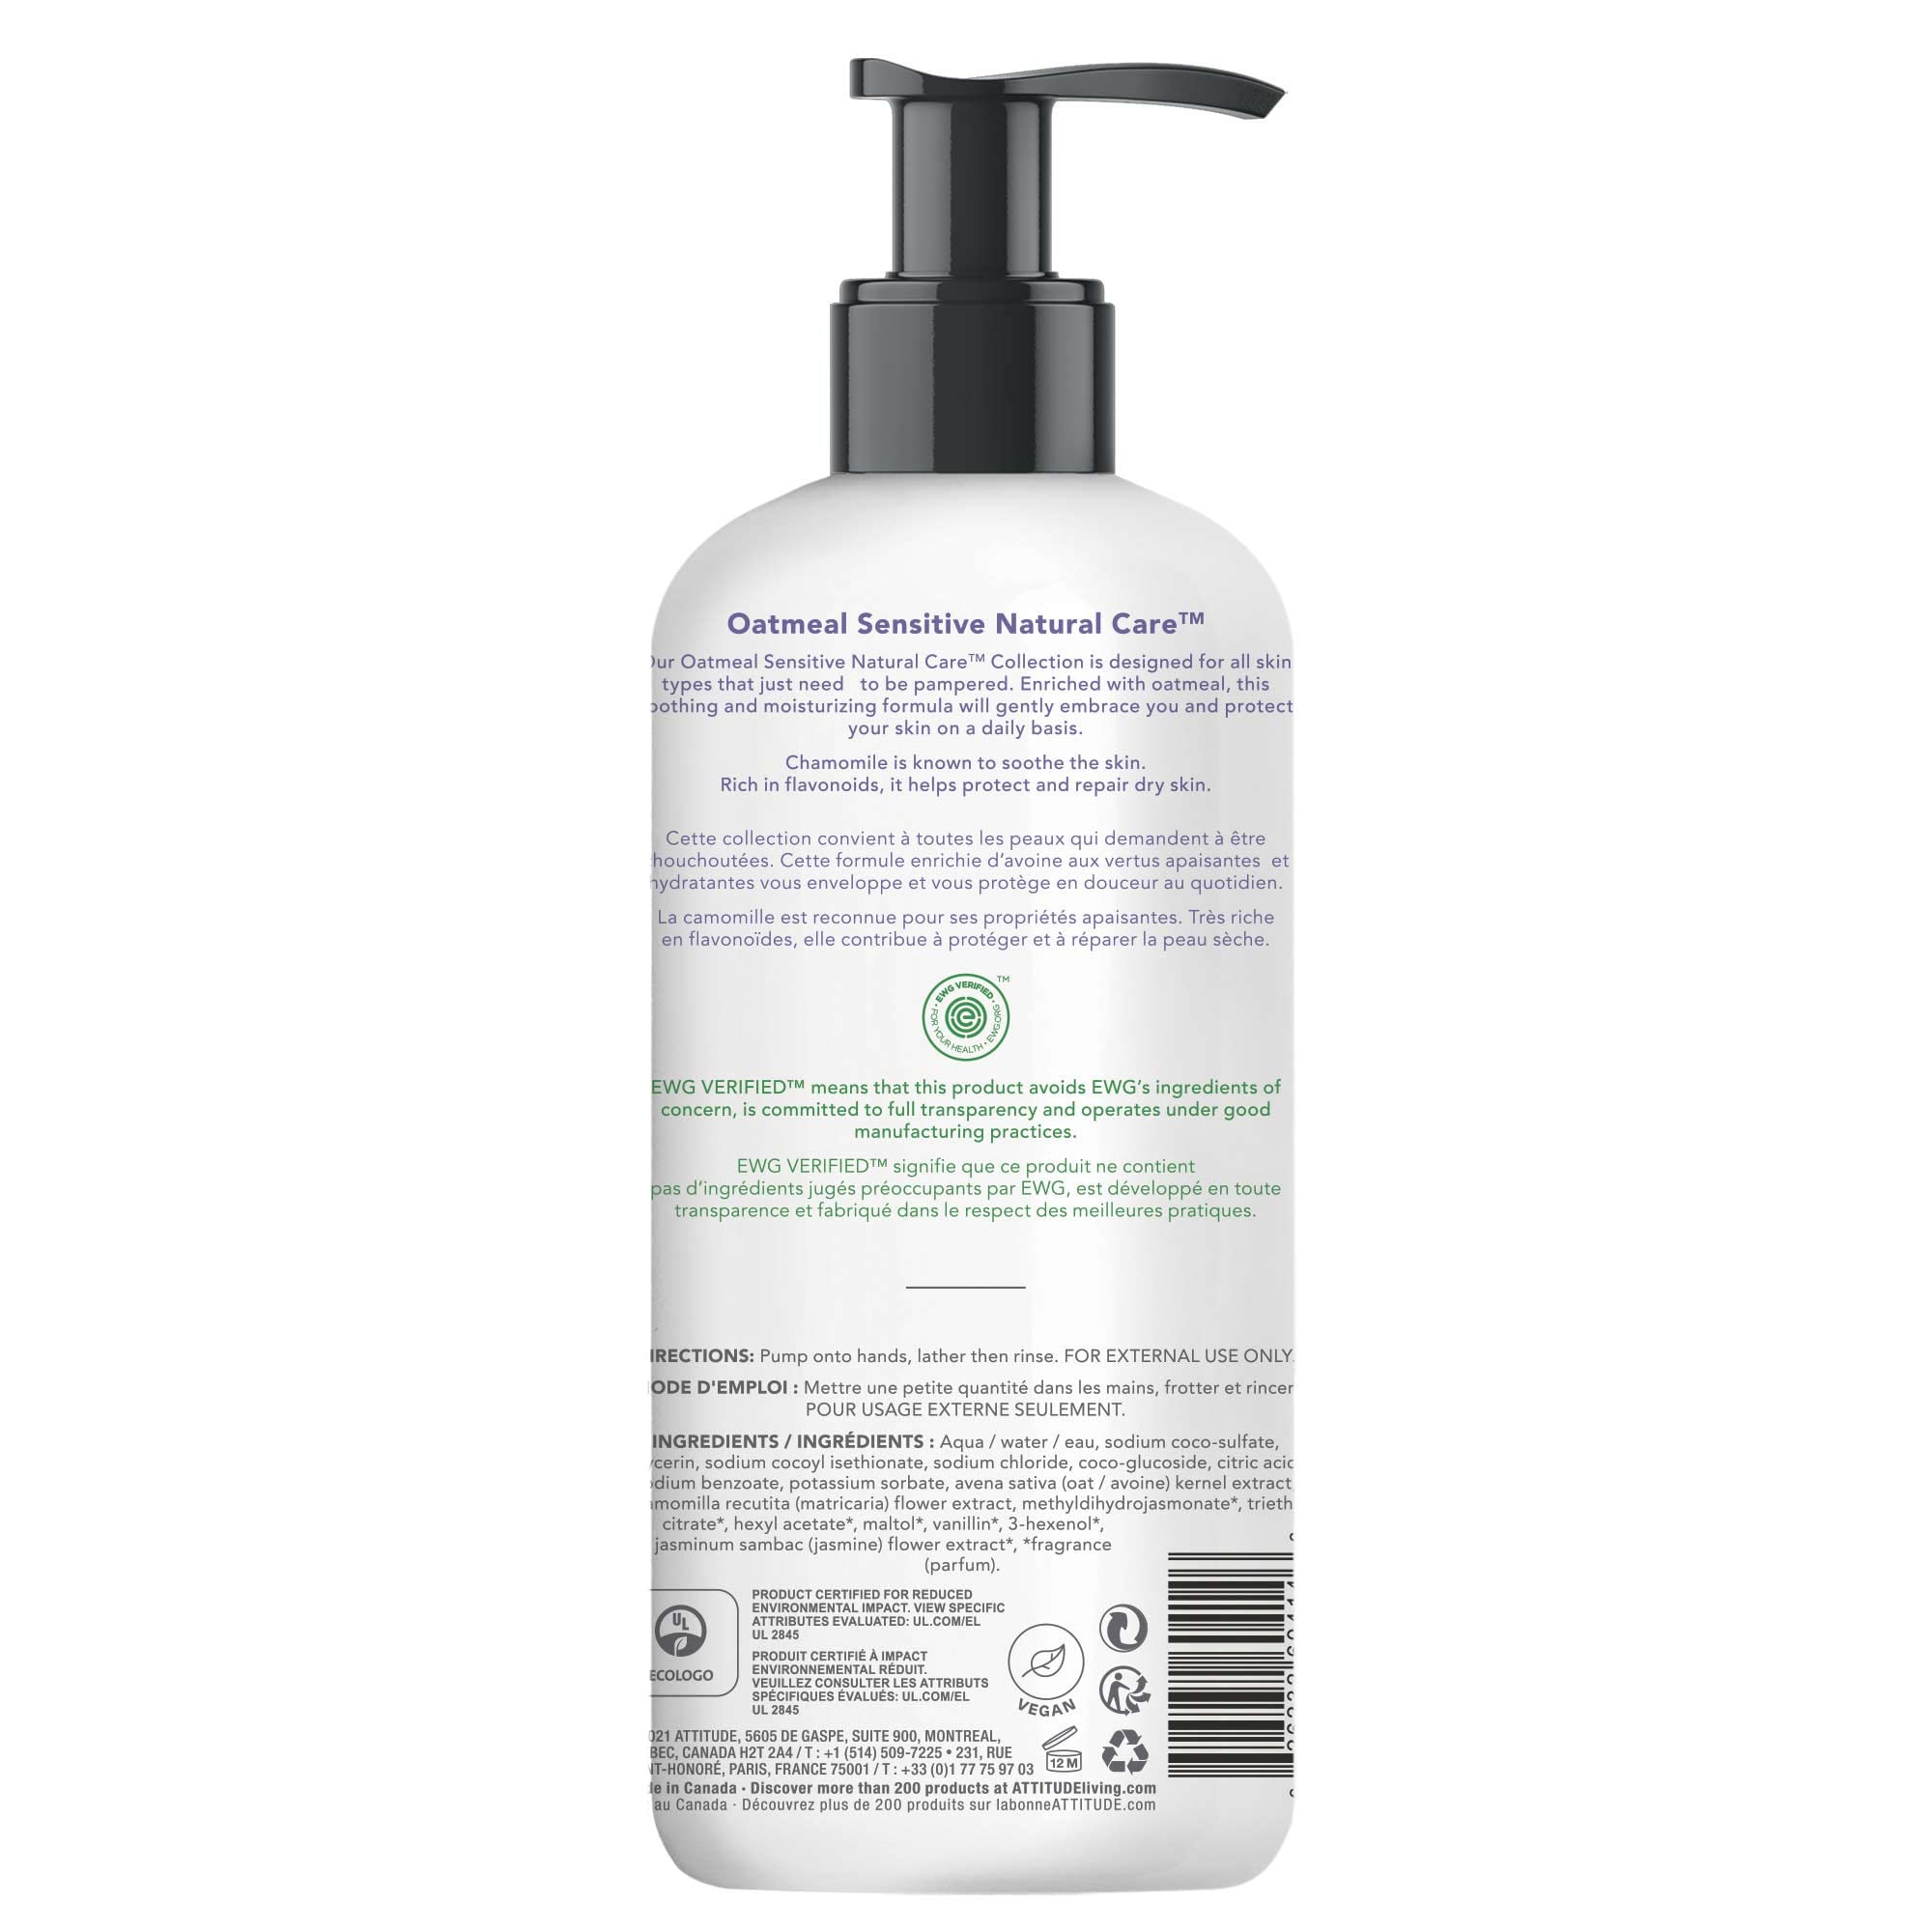 ATTITUDE Soothing Hand Soap for Sensitive Skin Enriched with Oat and Chamomile, EWG Verified, Dermatologically Tested & Hypoallergenic, Vegan & Cruelty-free, 16 Fl Oz